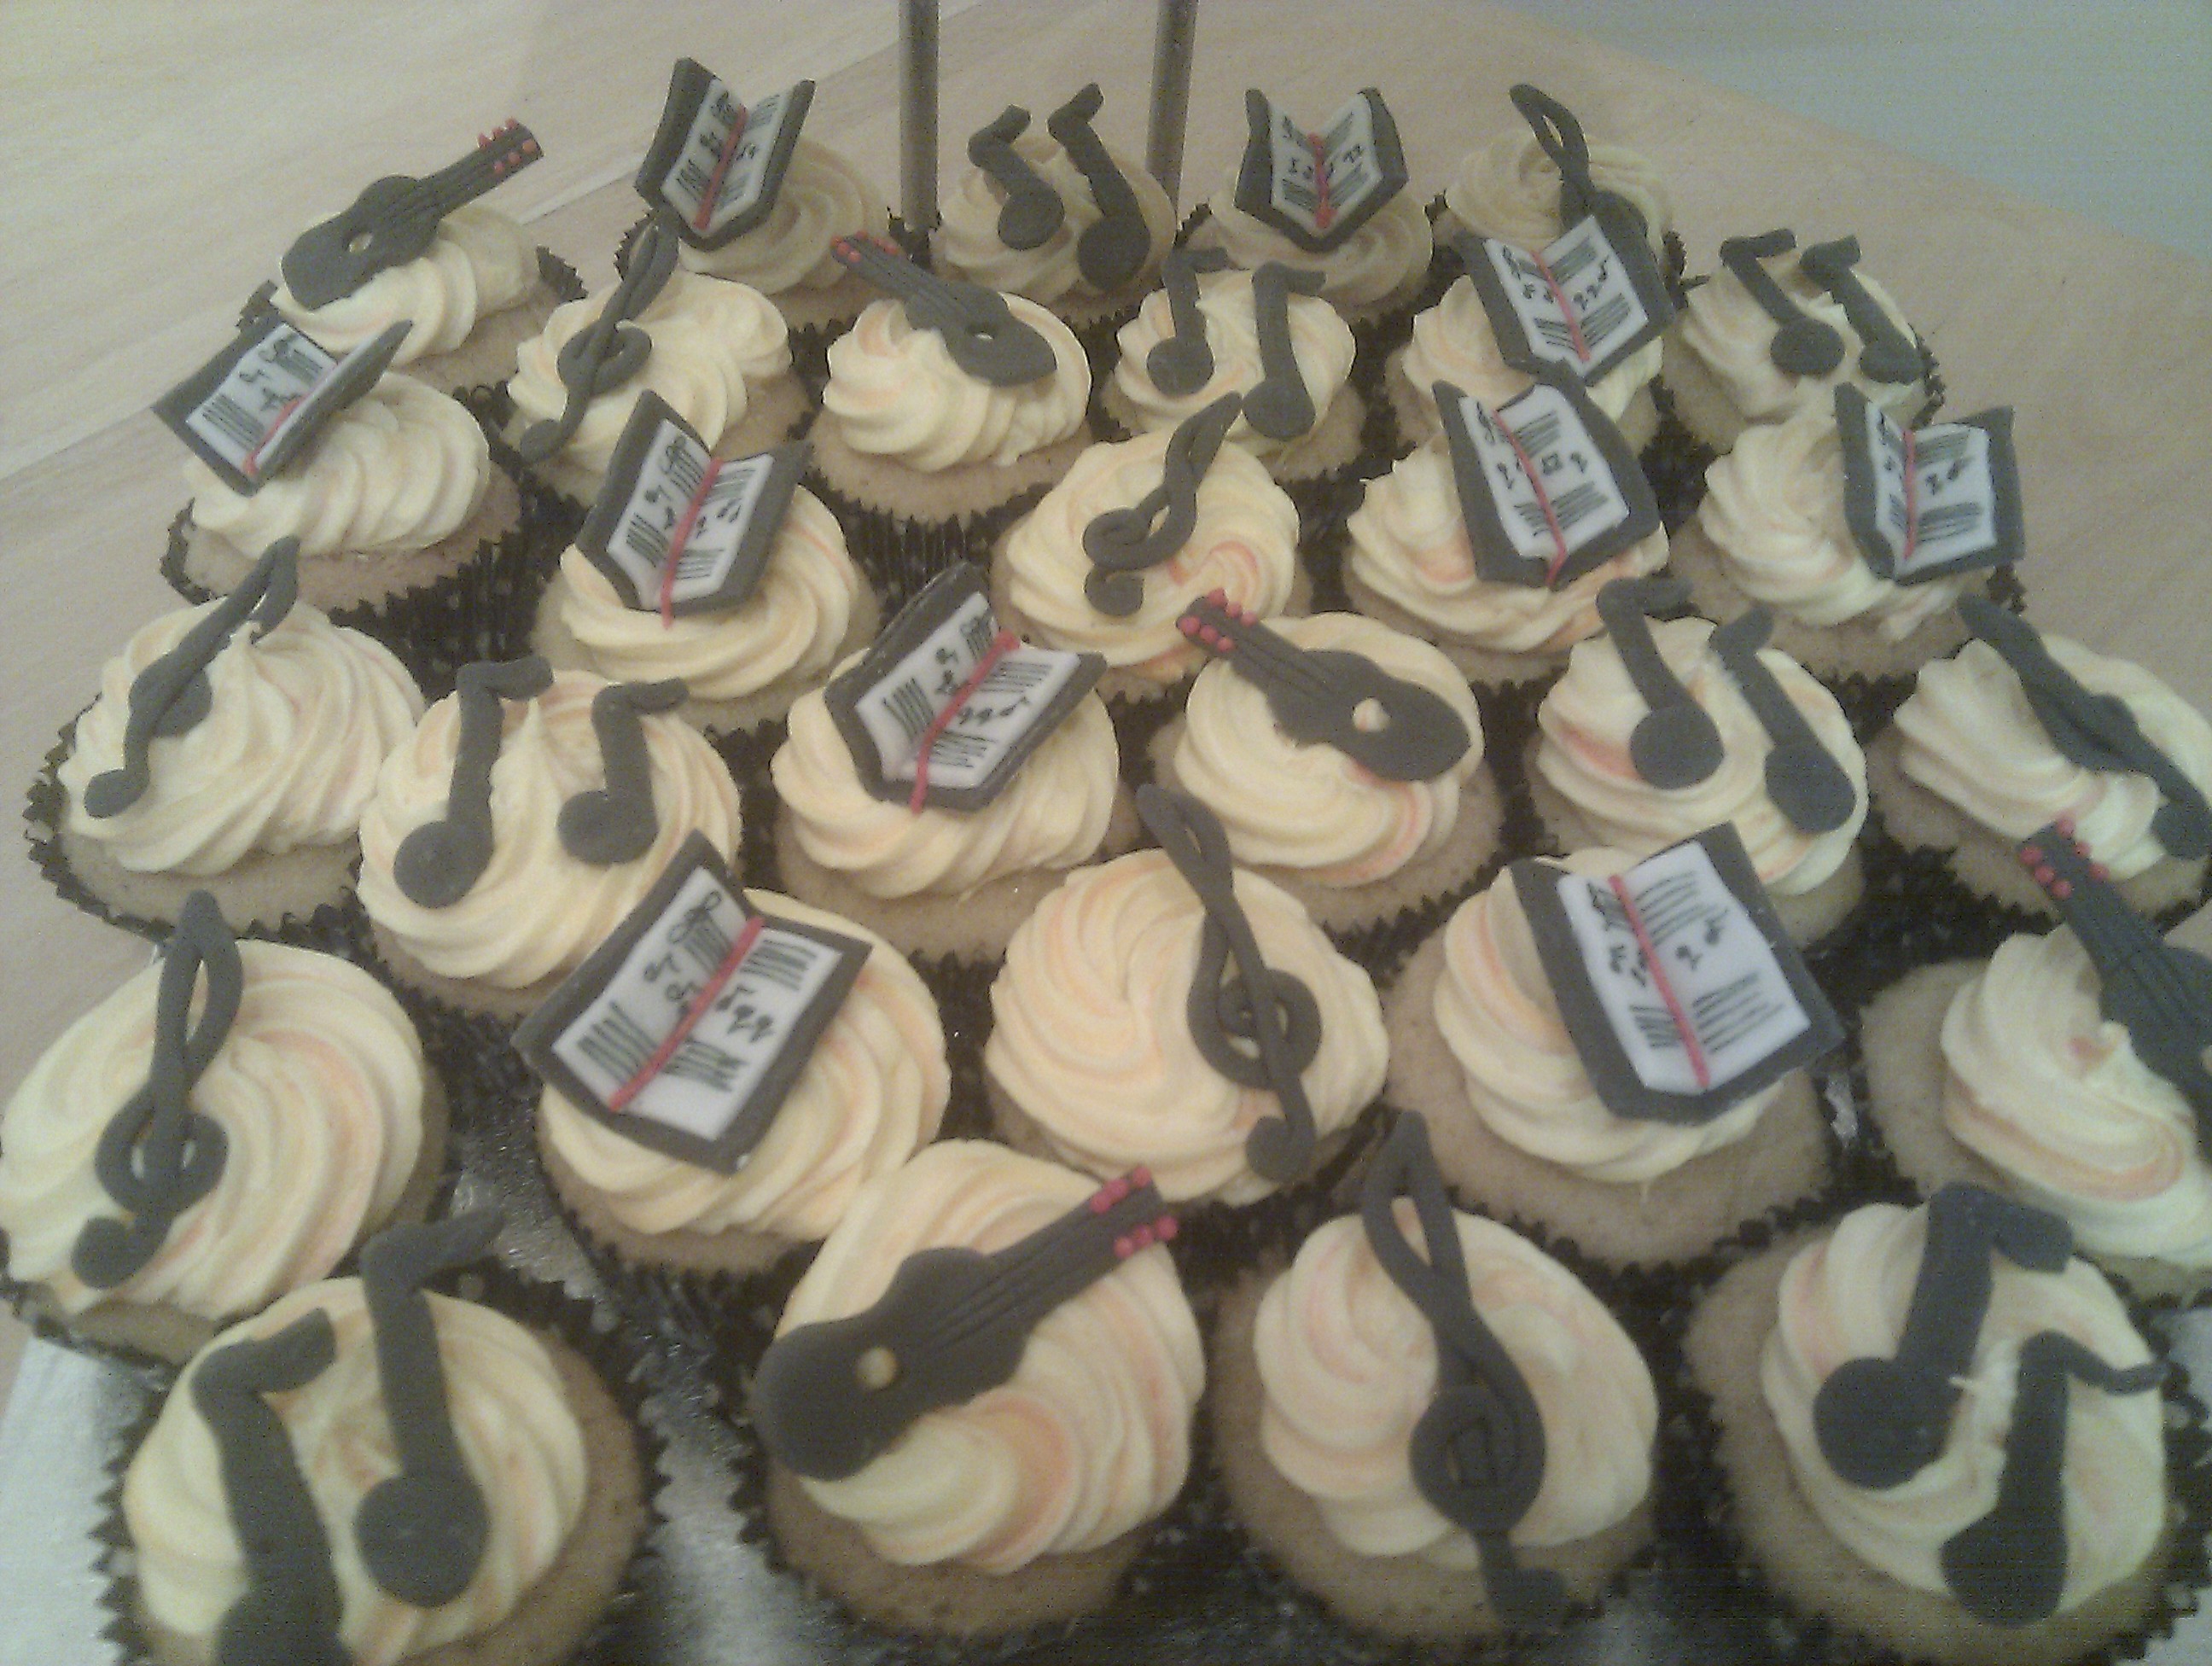 Musical Cup cakes